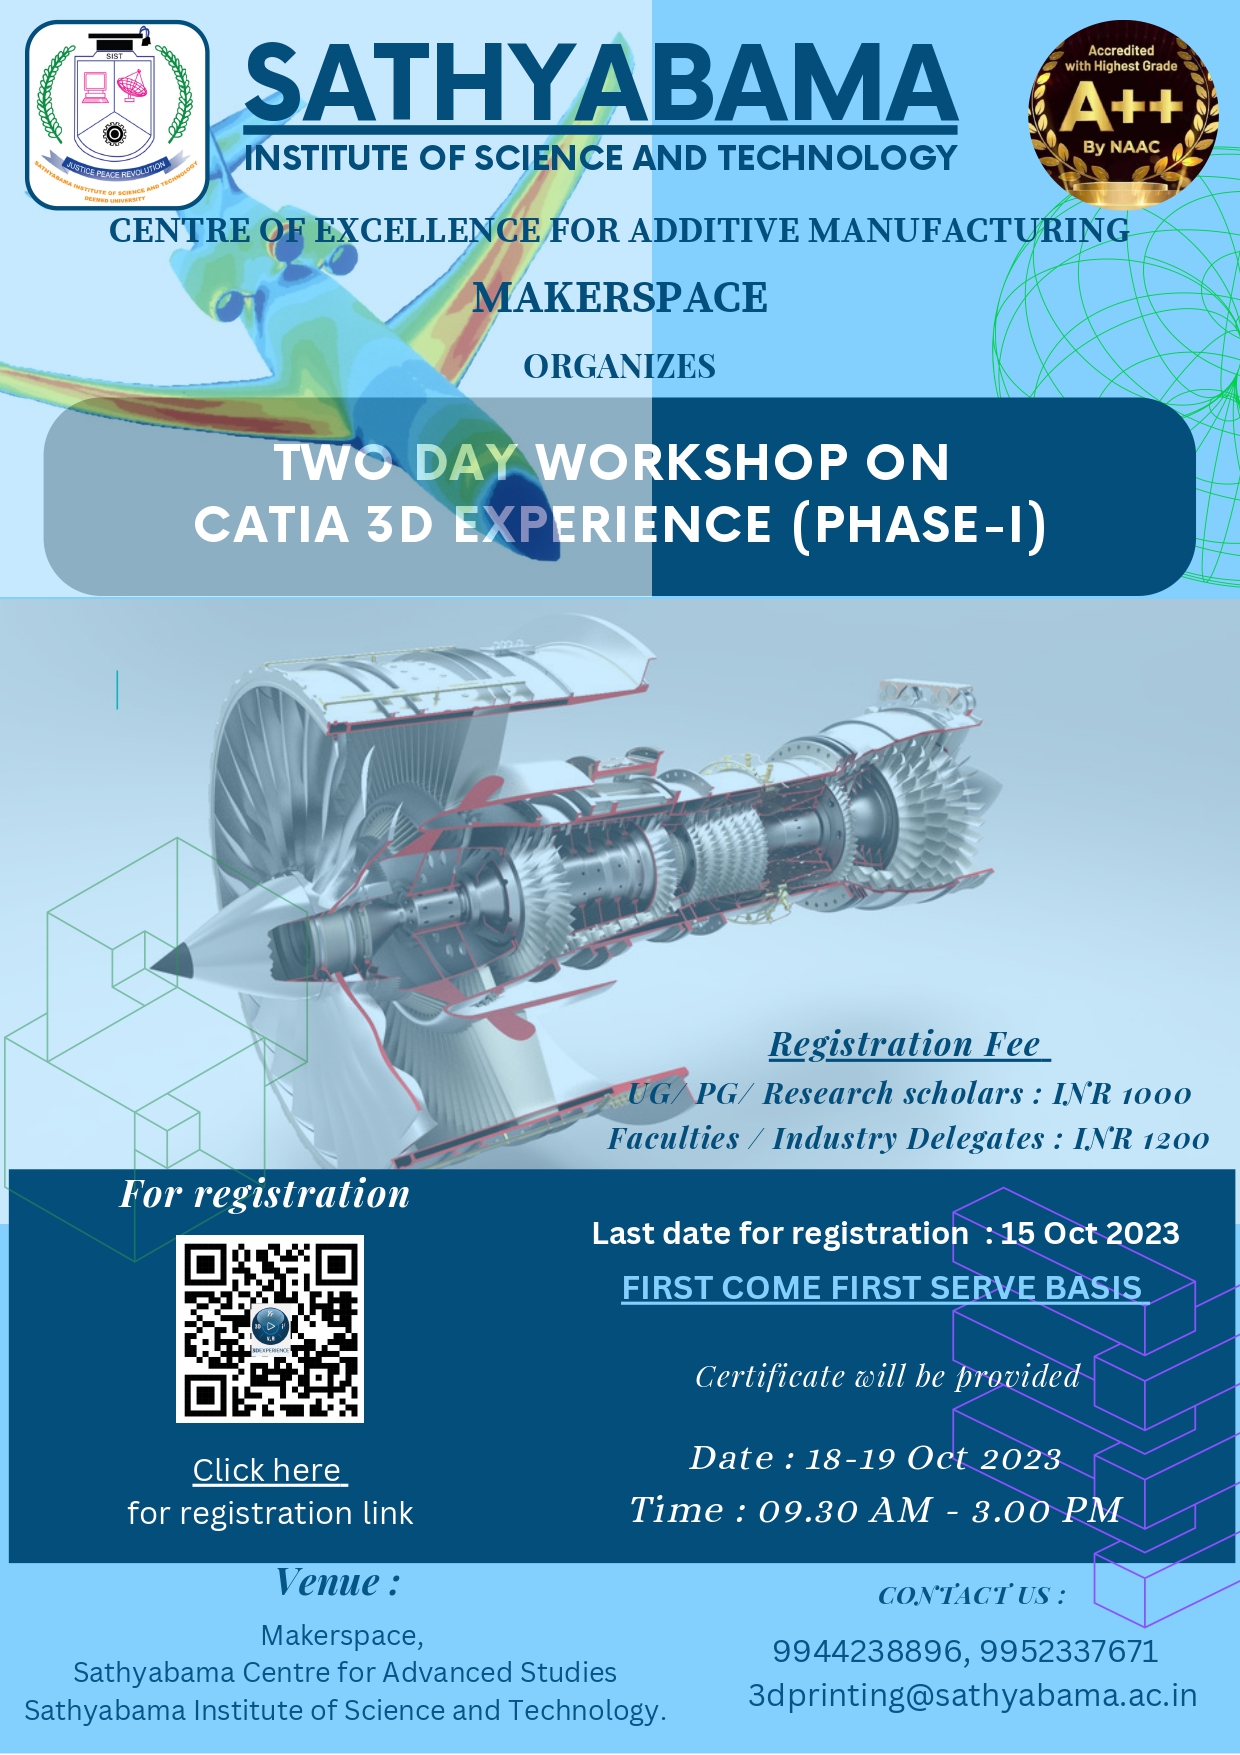 TWO DAY WORKSHOP ON CATIA 3D EXPERIENCE (PHASE-I)